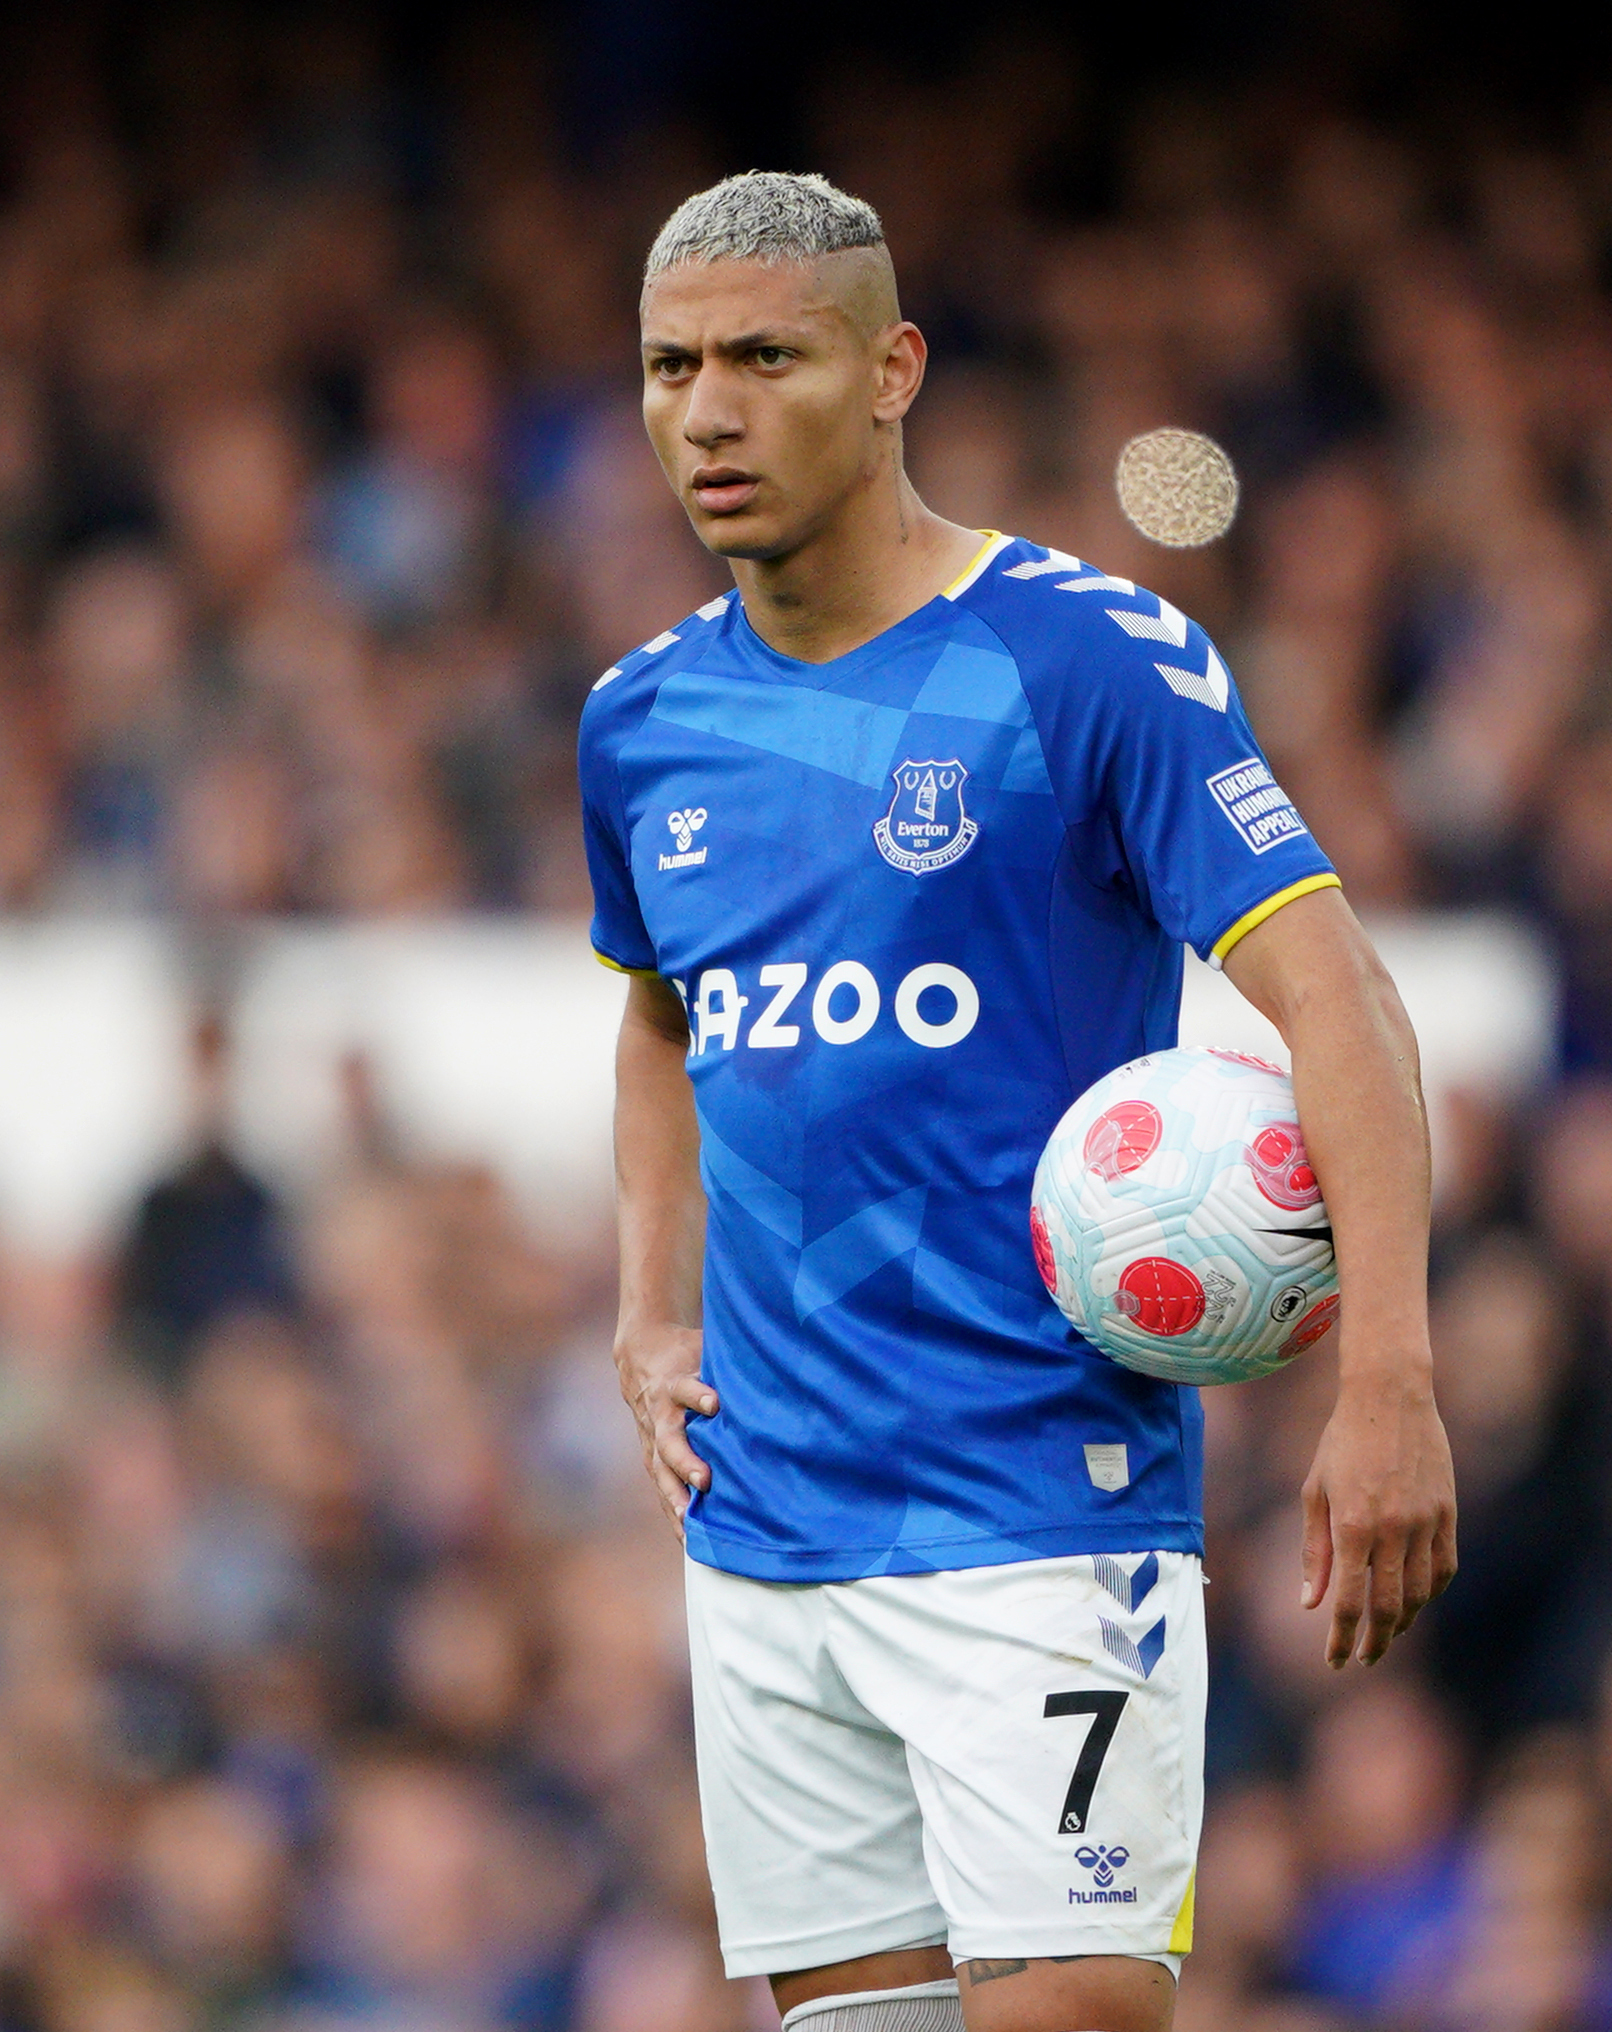 Tottenham seal deal to sign Richarlison from Everton for initial £50m, Transfer window